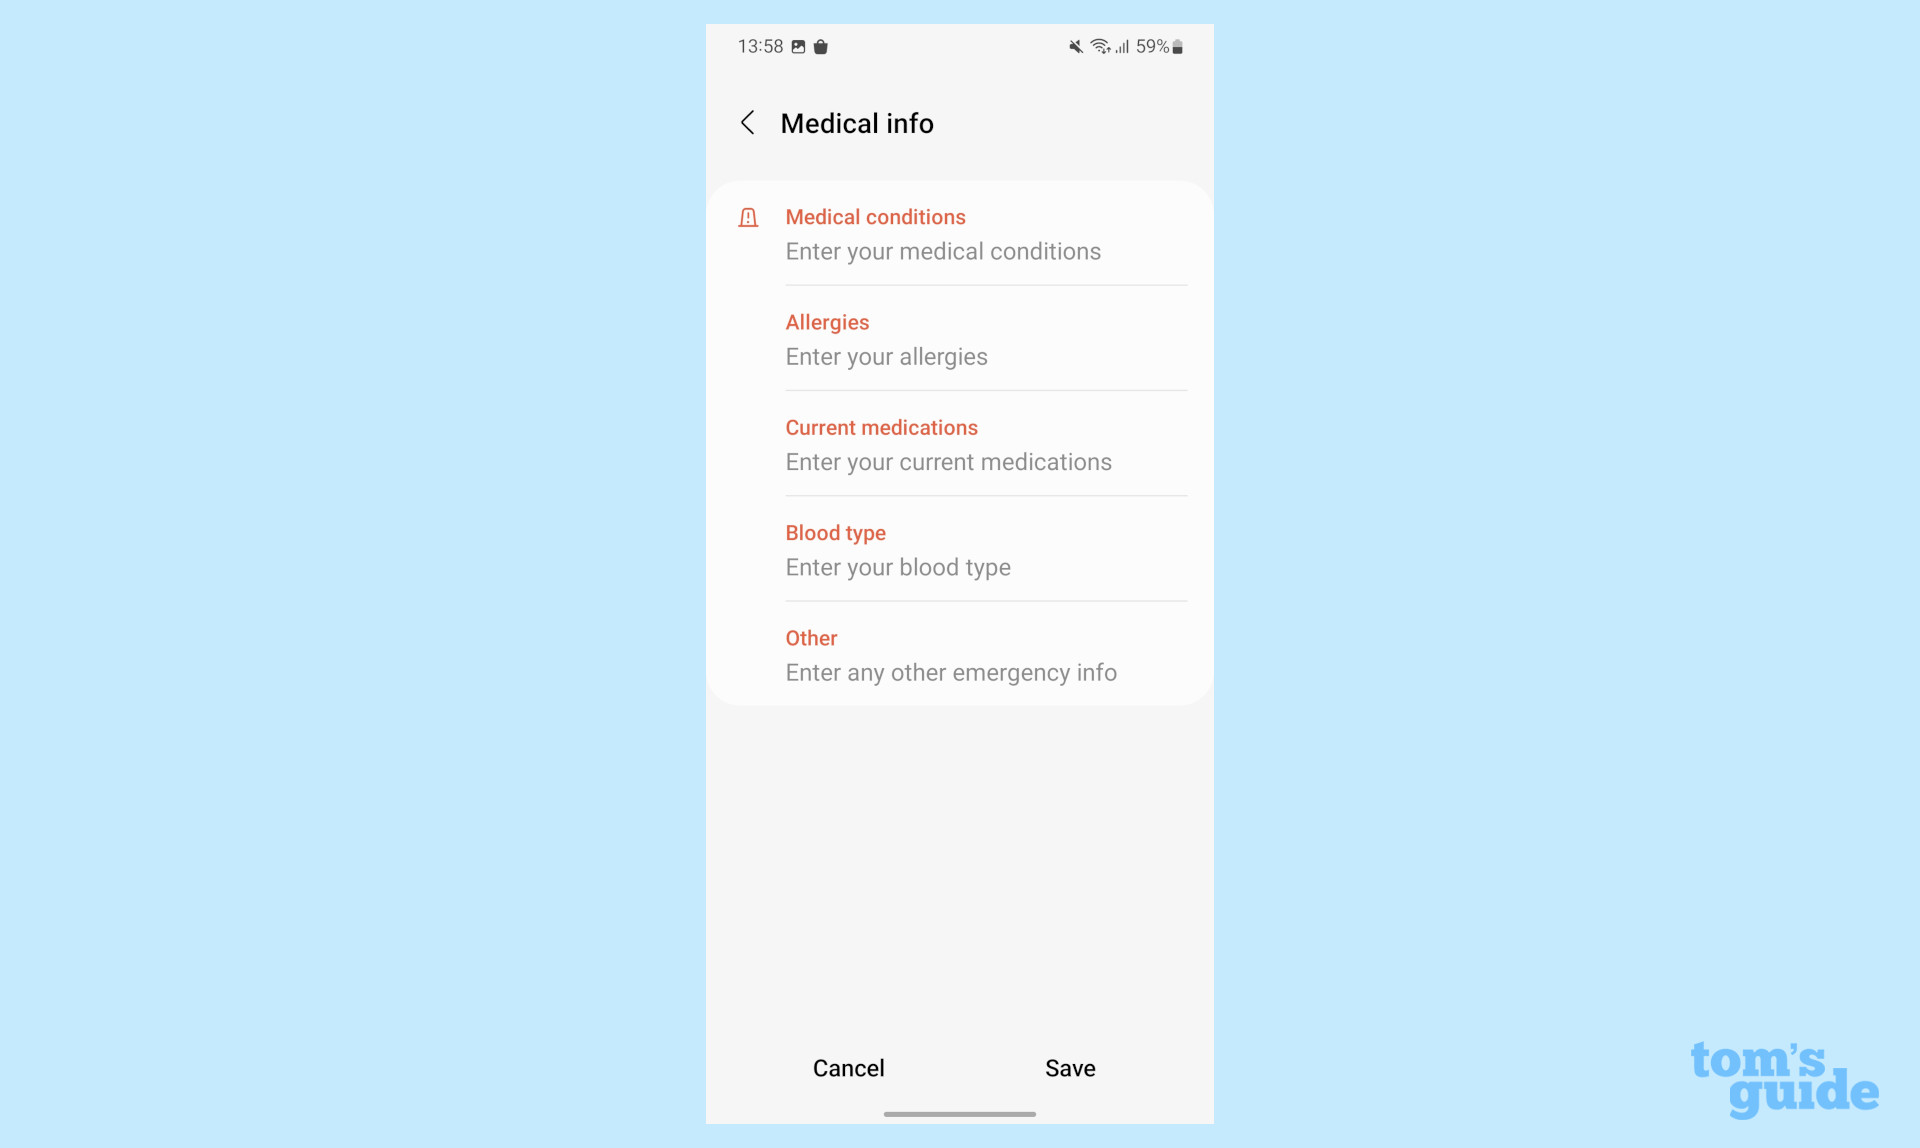 A screenshot of the Samsung Galaxy S22's settings menu, showing the input fields for medical information